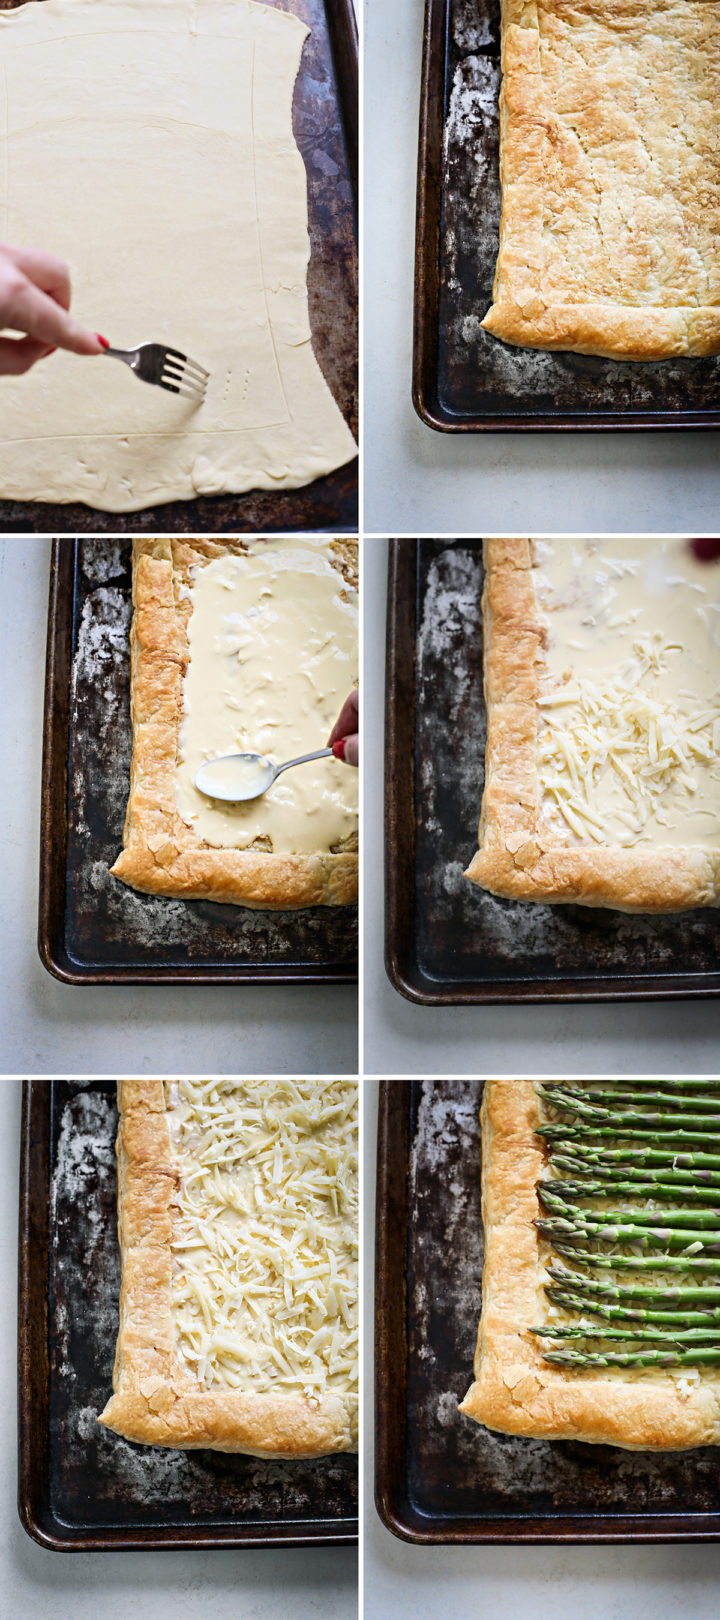 step by step photos showing how to make an asparagus tart with puff pastry